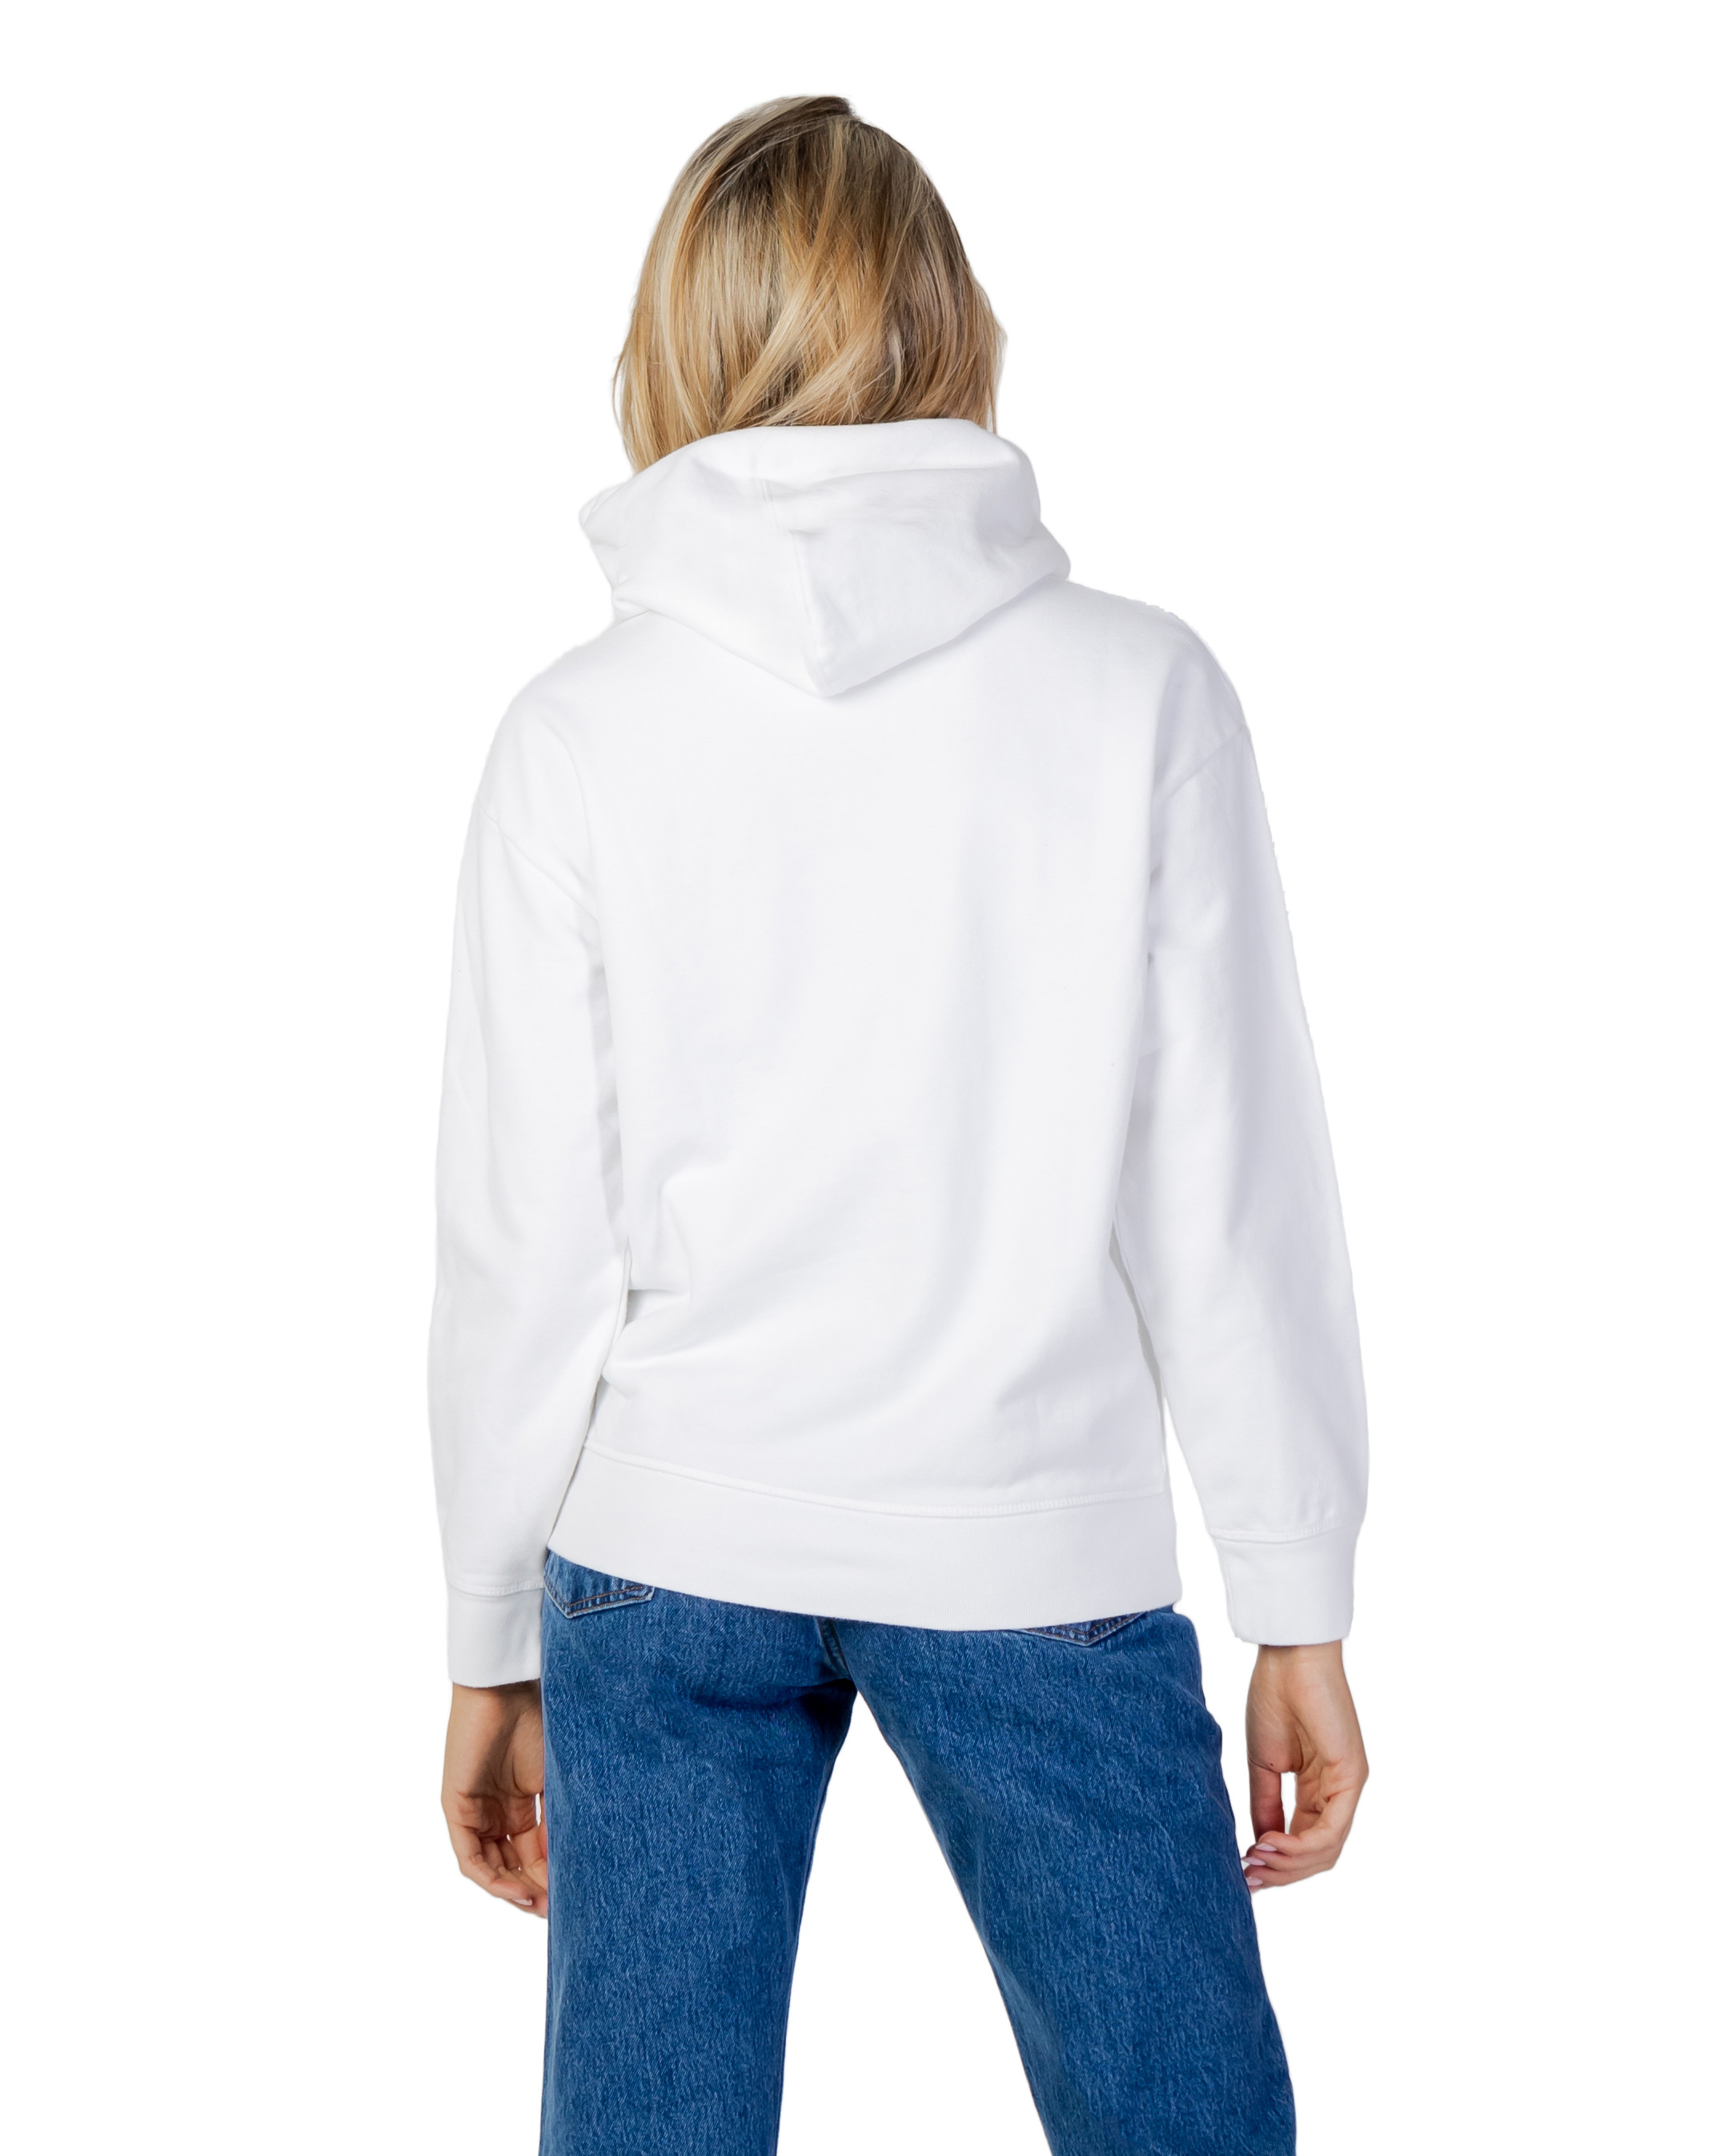 Hooded Sweatshirt with Long Sleeves and Front Pockets